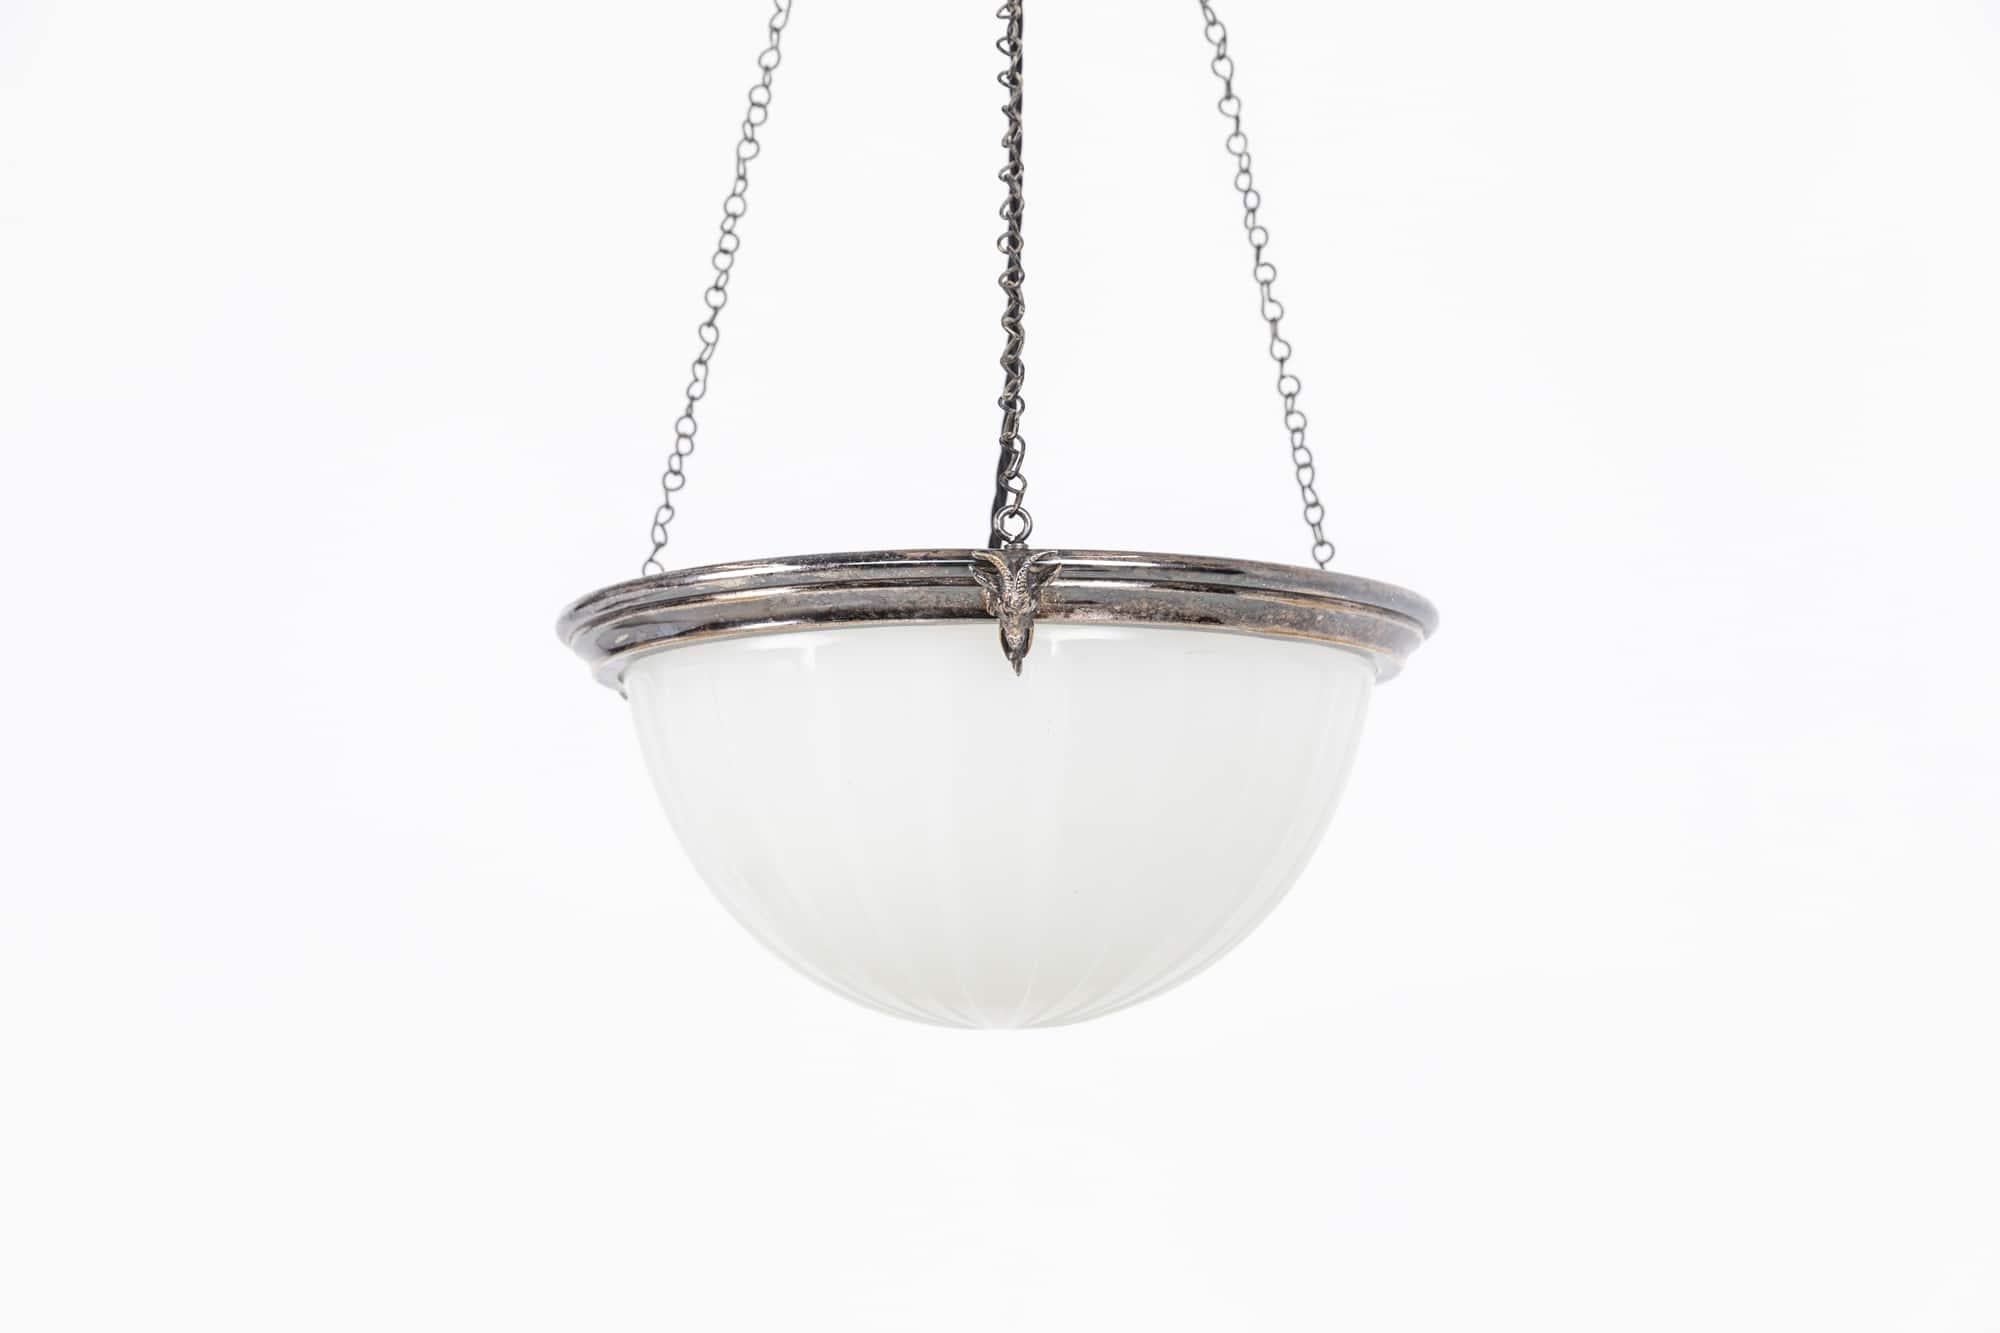 

A beautiful silver plated moonstone glass plafonnier ceiling light. c.1920

Silver plated brass ring of embellished with rams head decoration. Beautiful white moonstone glass bowl complete with chain and three-way ceiling hook.

Chains can be